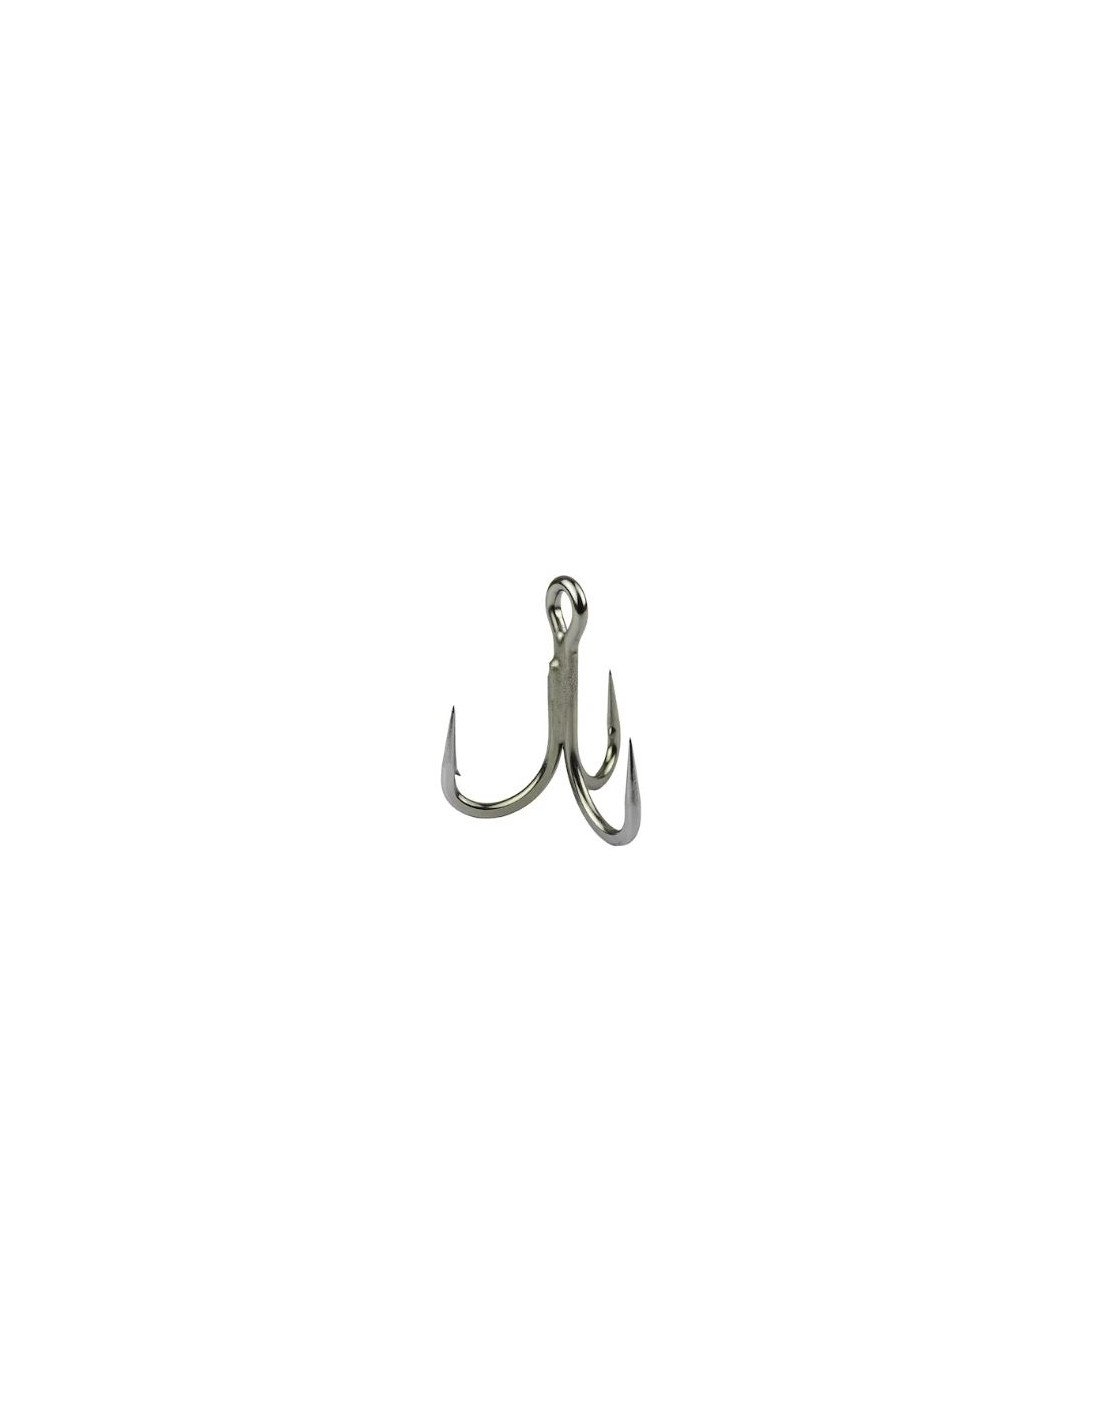 Mustad 233NP-BLNWCH White Chart Dressed Treble Hooks Size 6 Jagged Tooth  Tackle